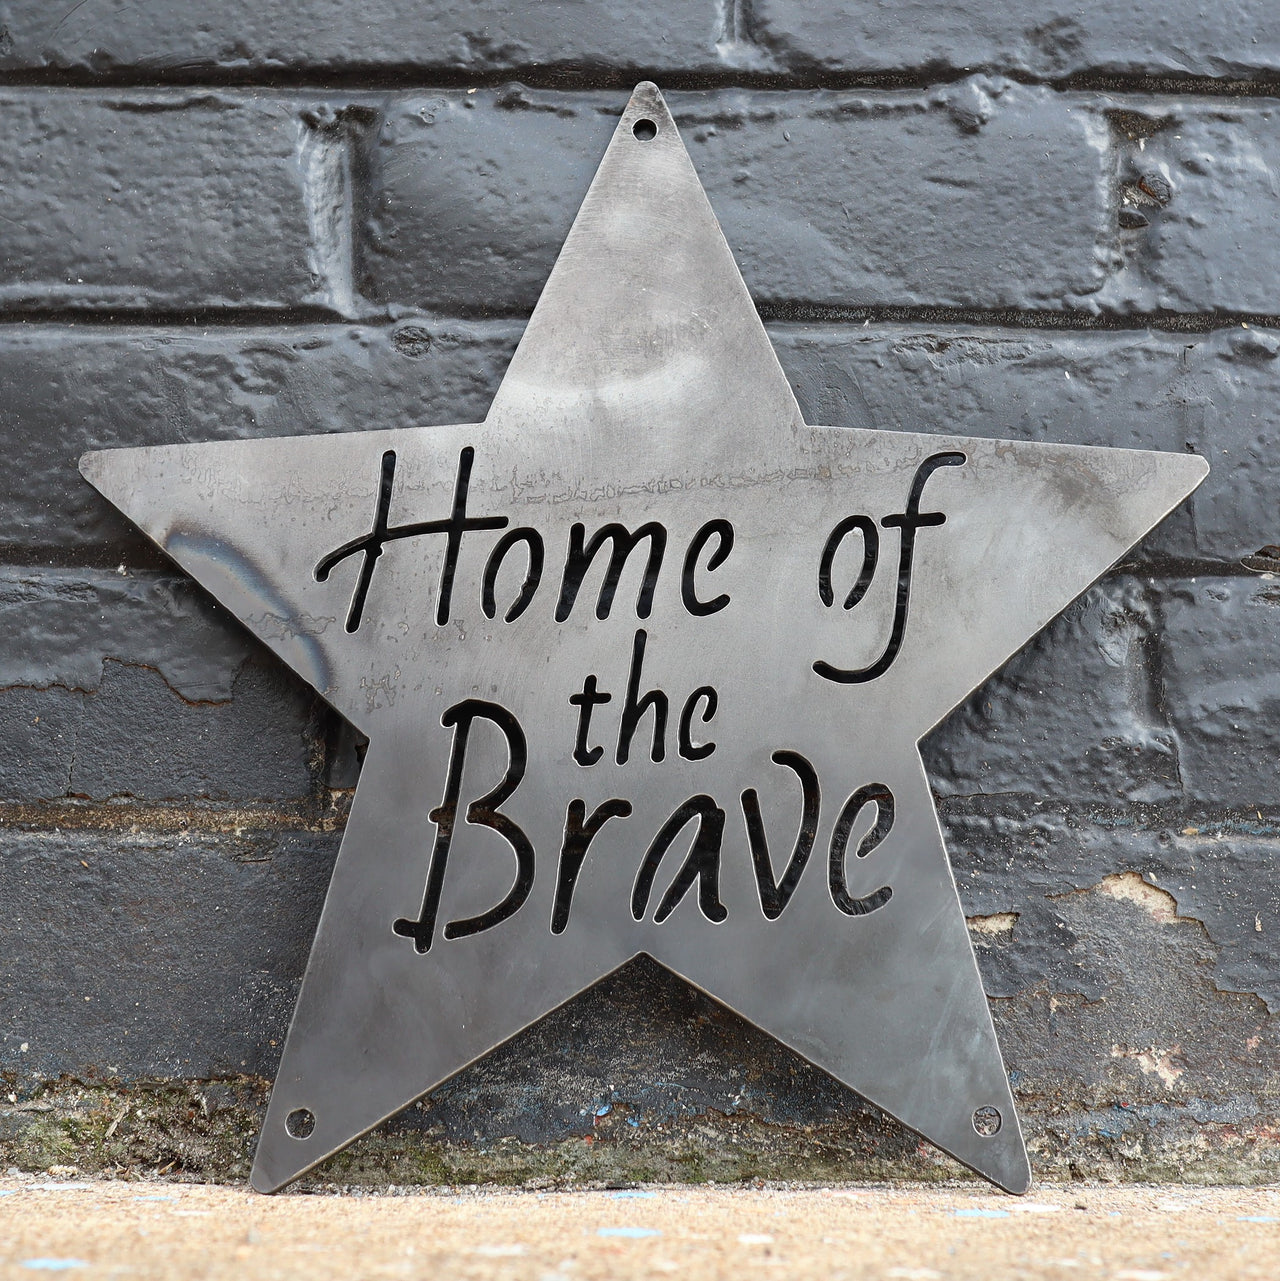 Home of the Brave Metal Sign - Patriotic Star Wall Art - Fourth of July Decor